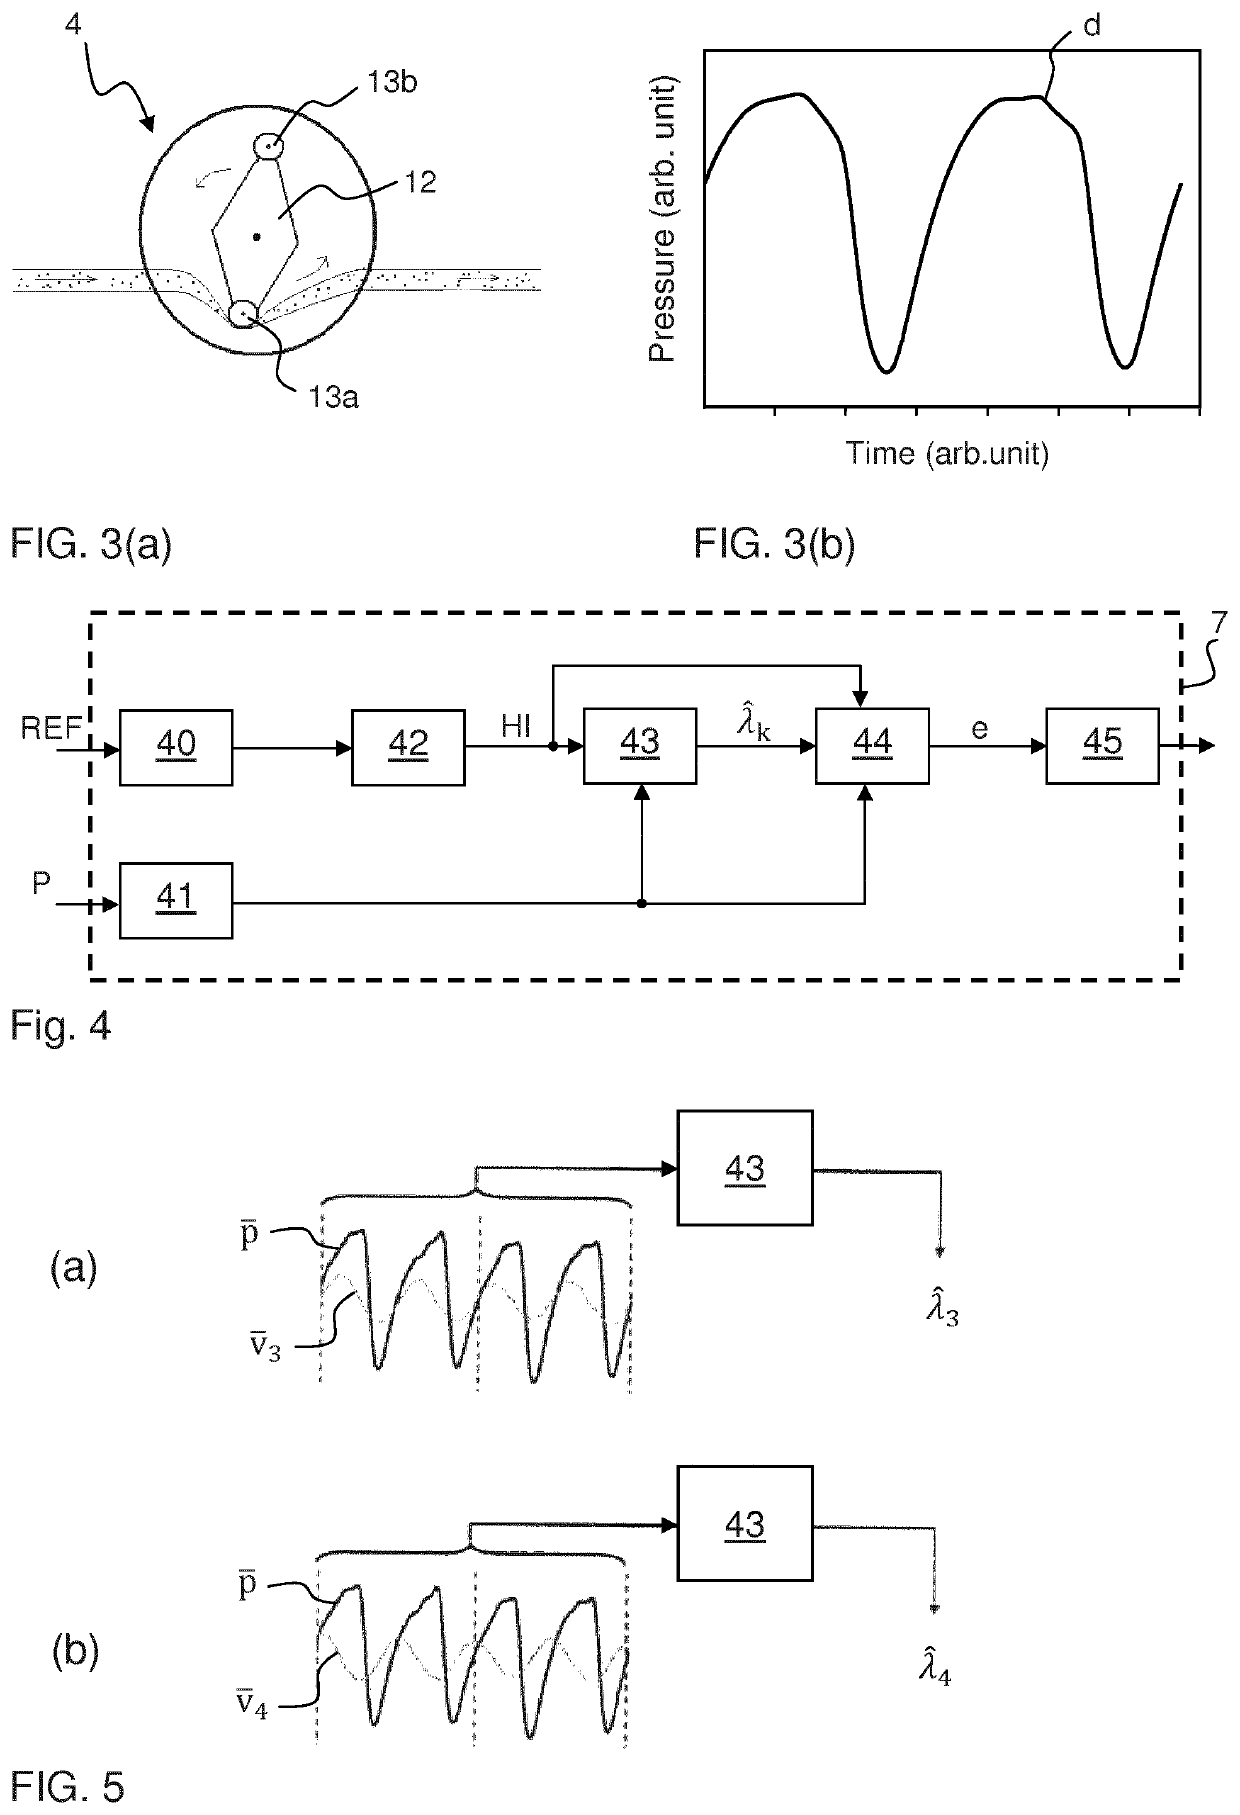 Filtering of pressure signals for suppression of periodic pulses